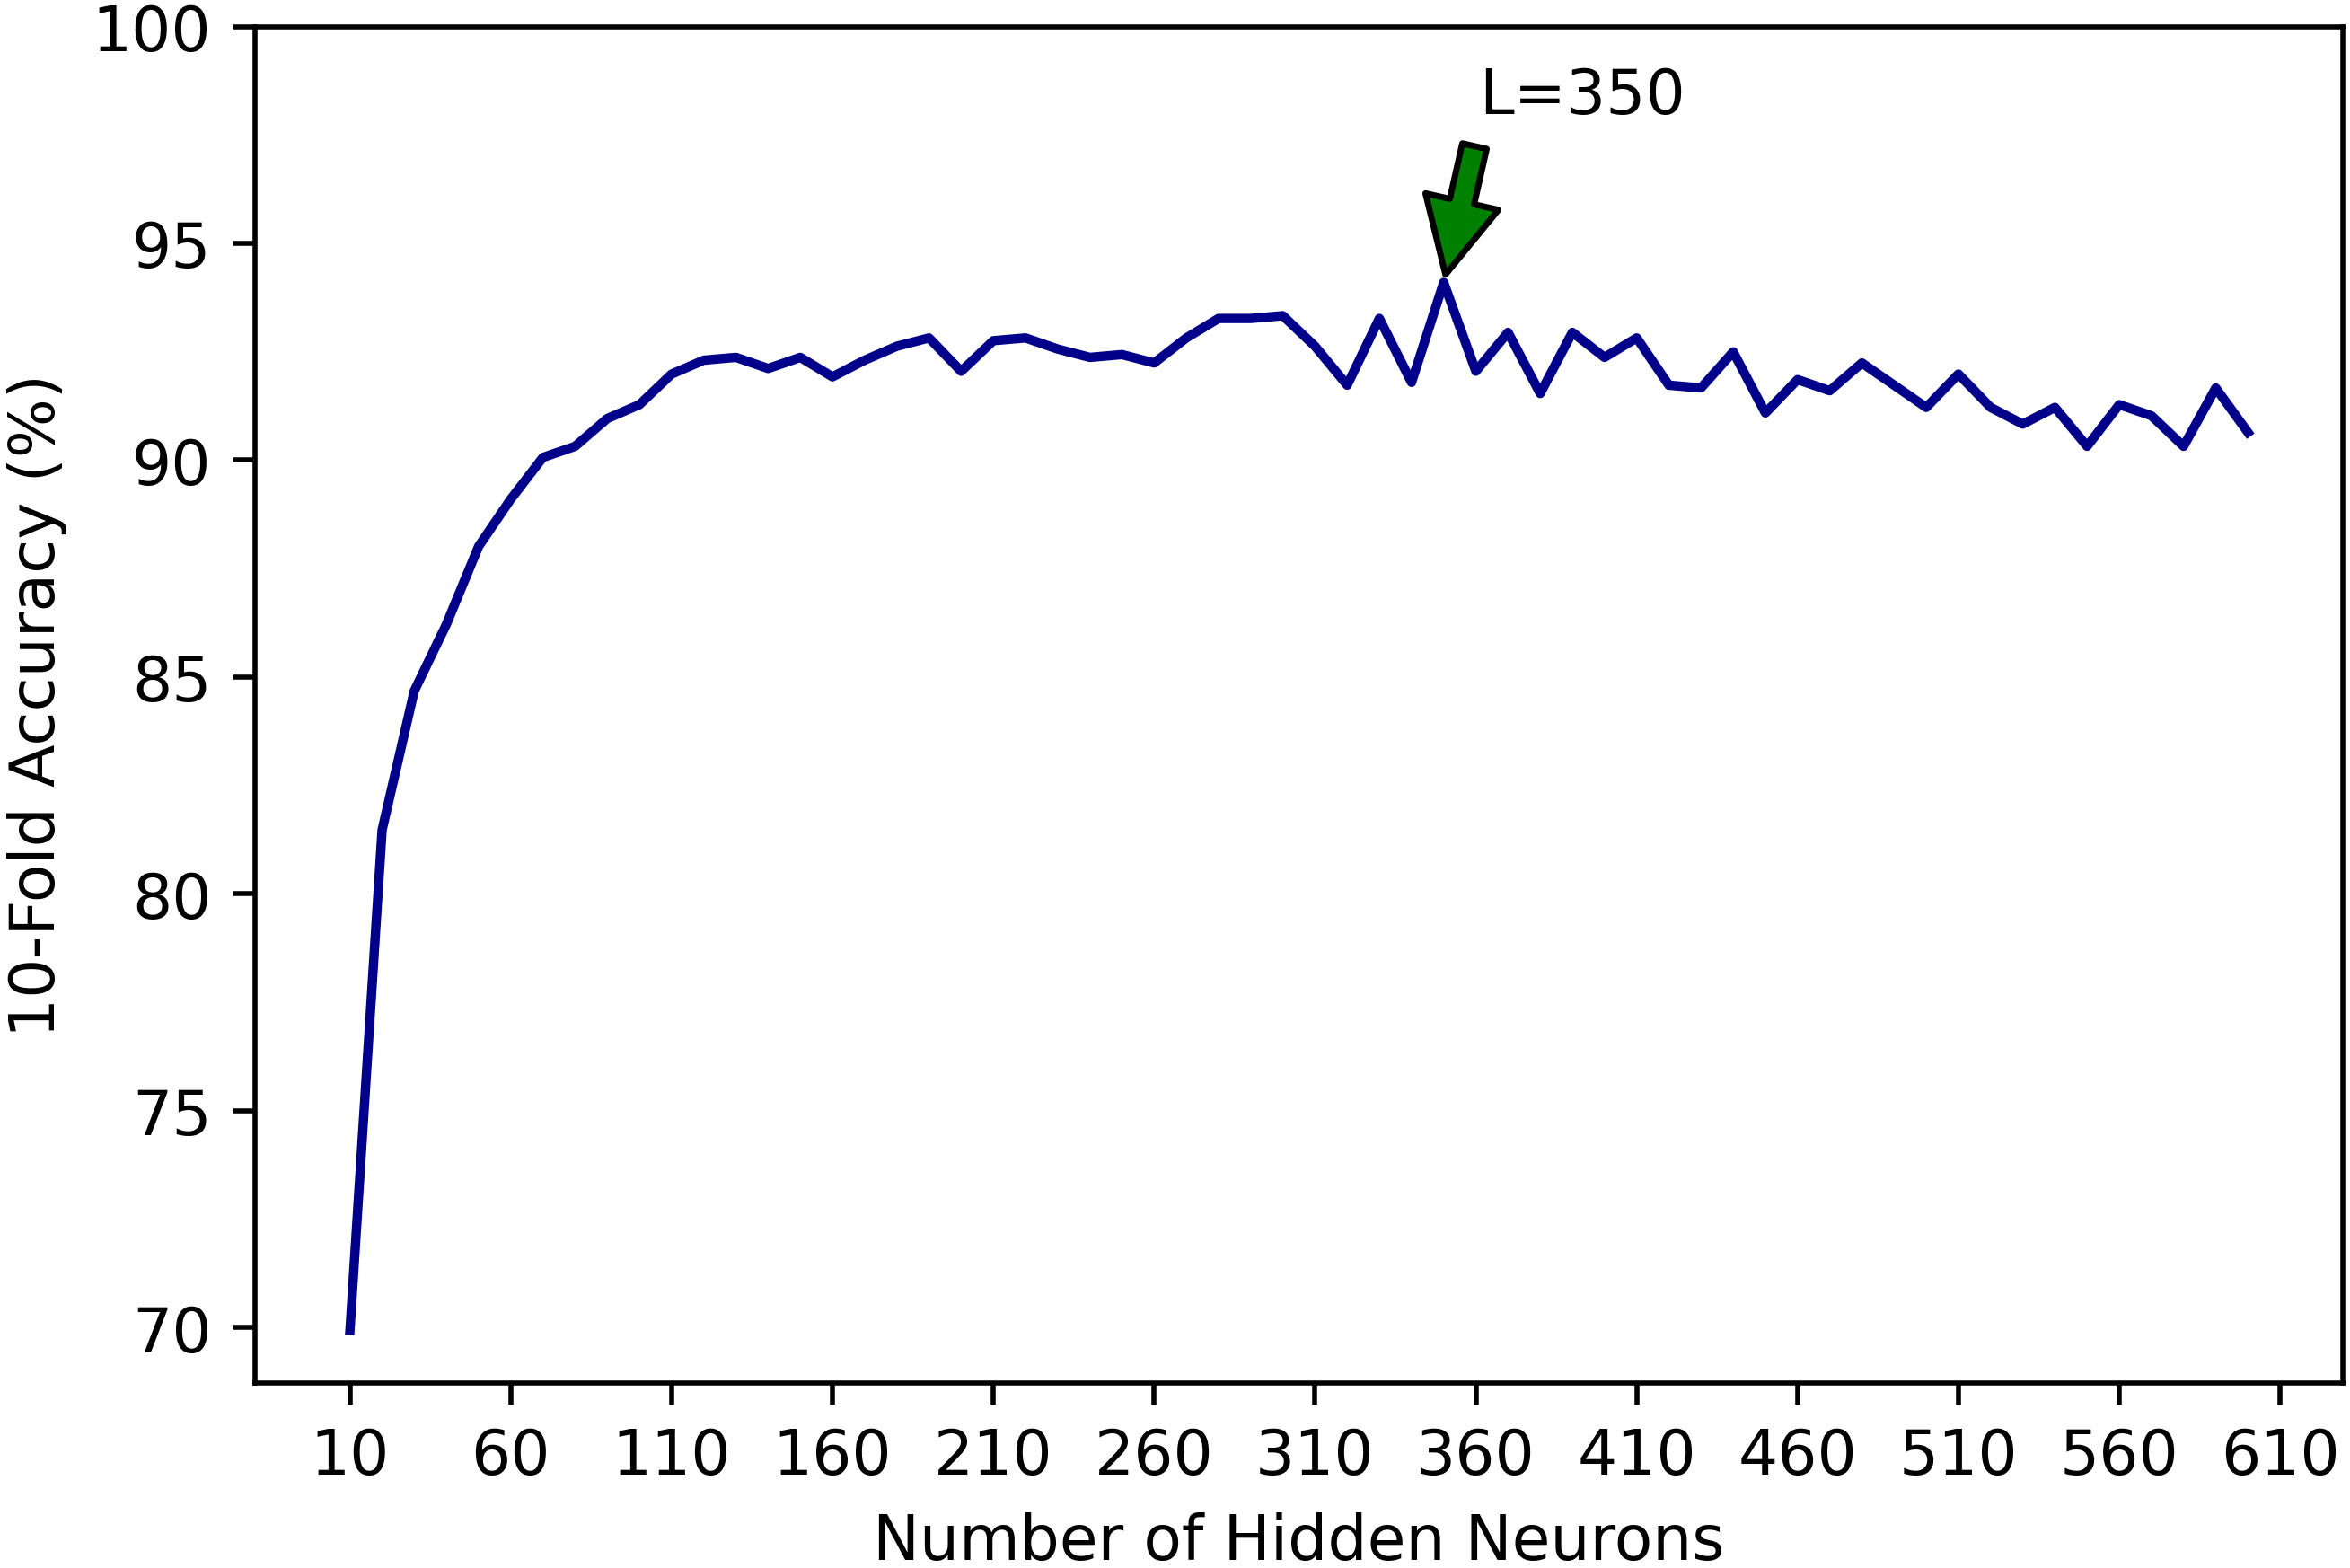 Effect of the increase in the number of hidden neurons (L) on 10-fold cross-validation accuracy. Accuracy increases with increase in L upto L=140, and witnessed highest 10-fold cross-validation accuracy of 94.74% at L=350.